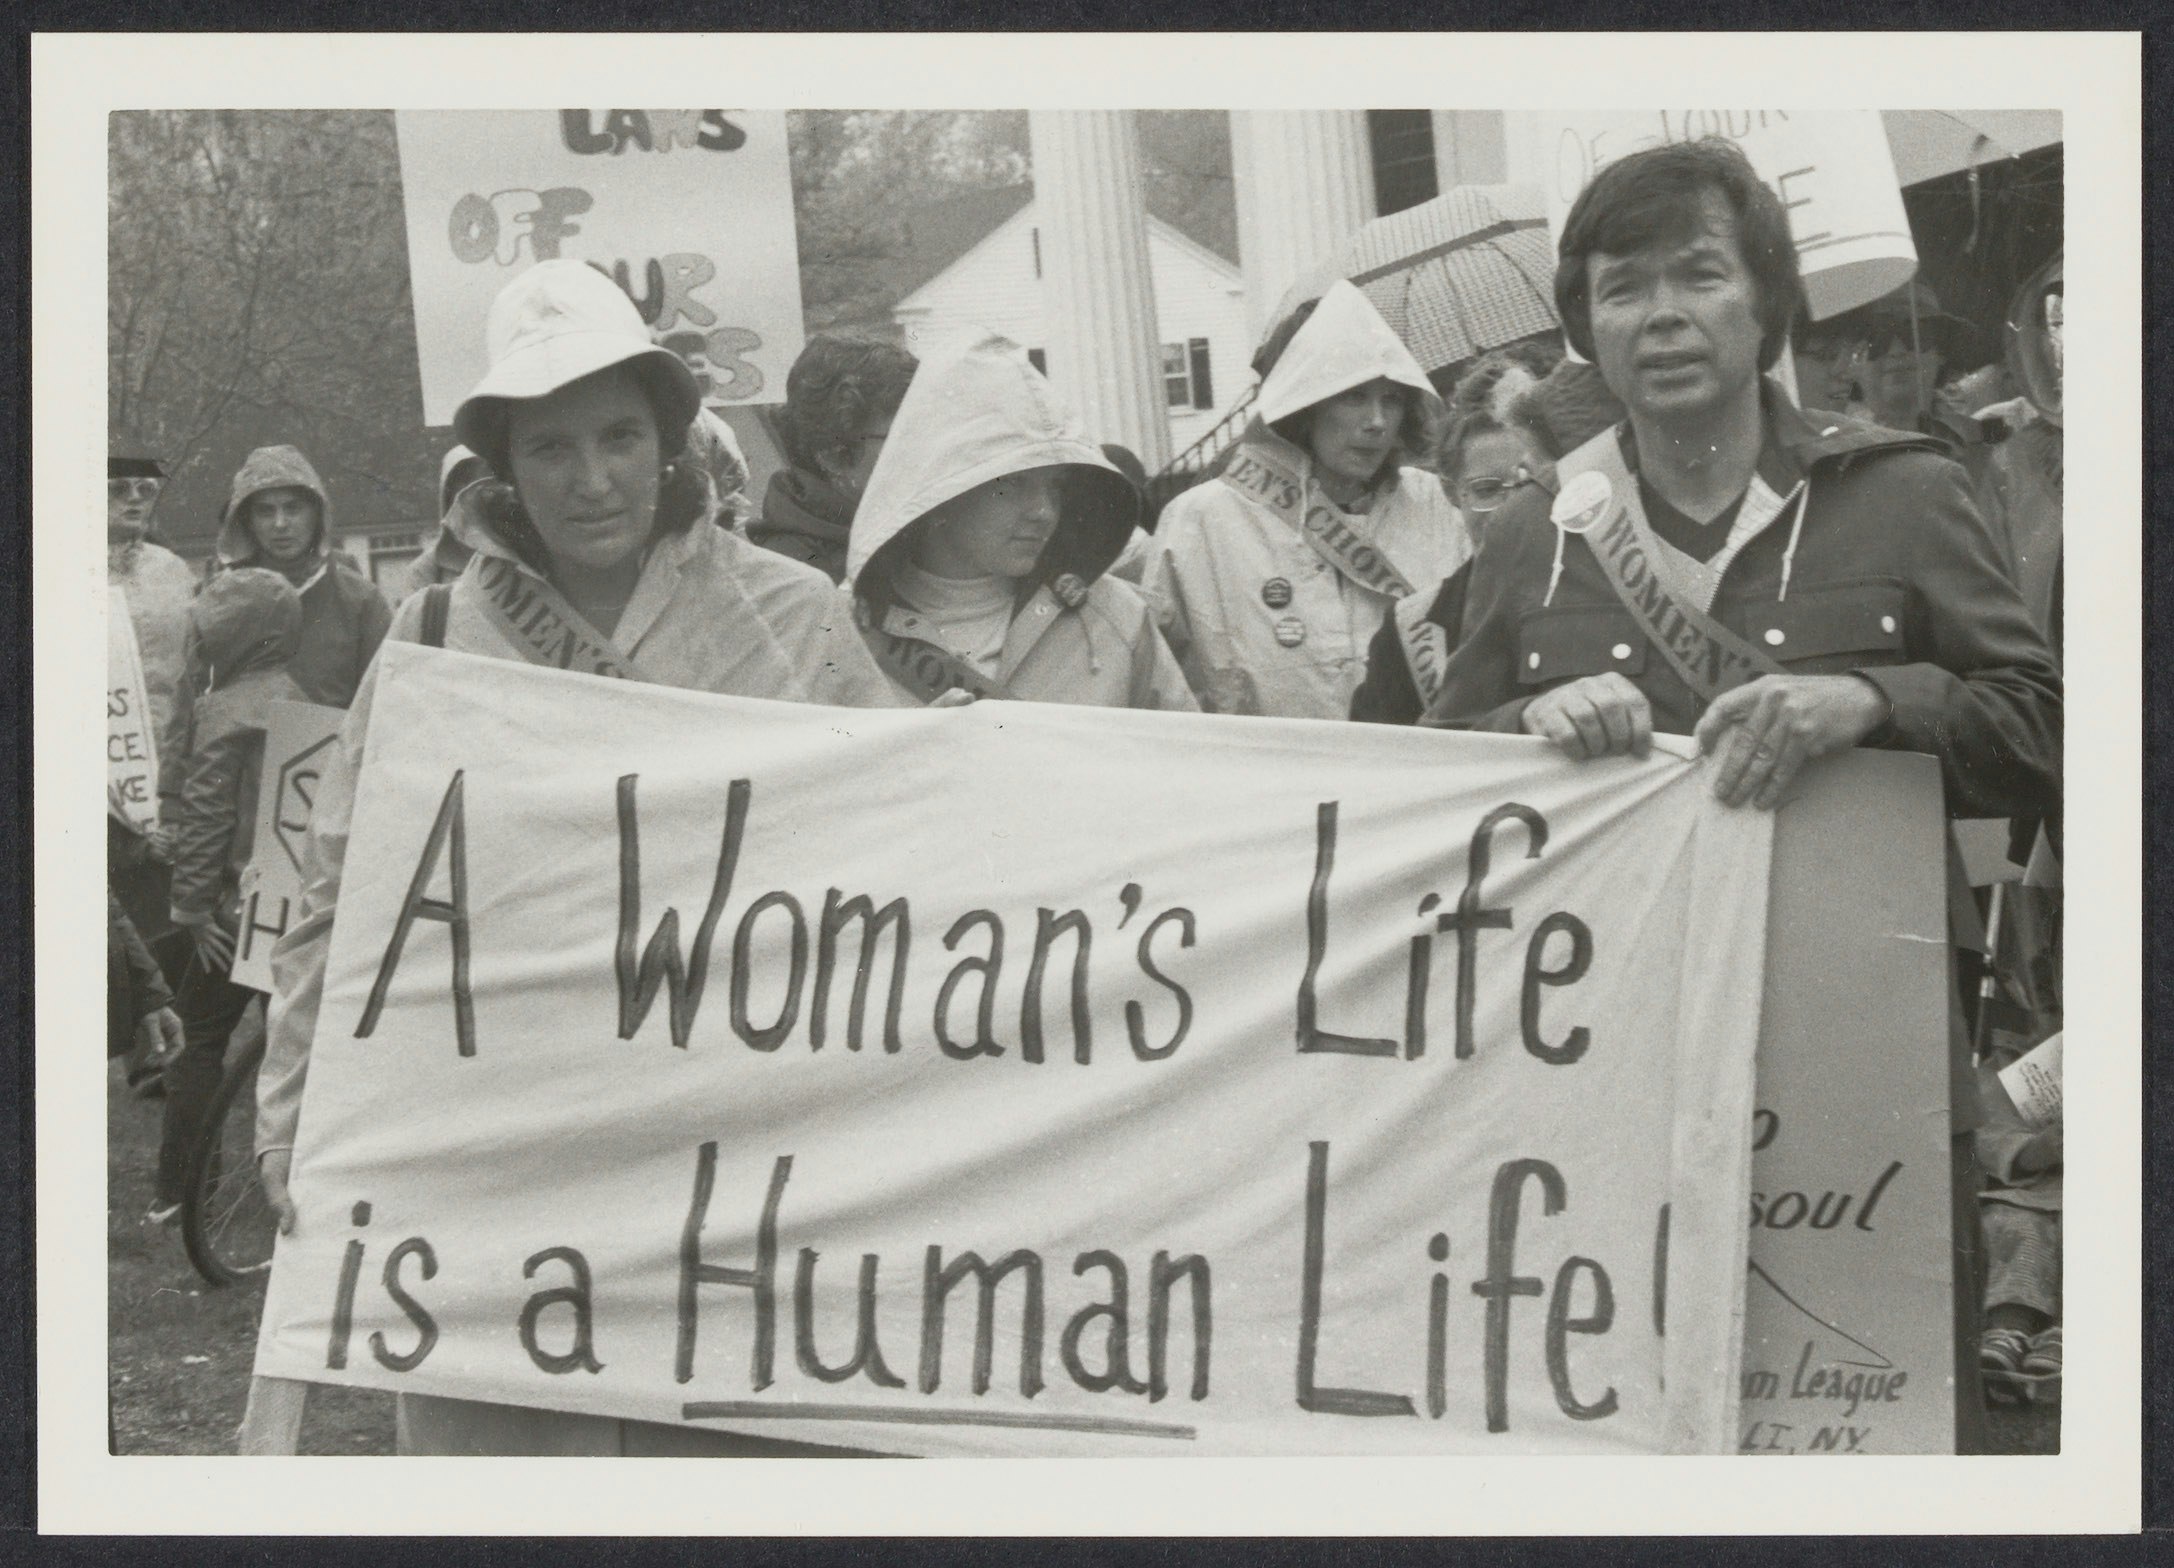 Norma Swenson (left) and Bill Baird (right) holding banner that states "A Woman's Life is a Human Life" at event